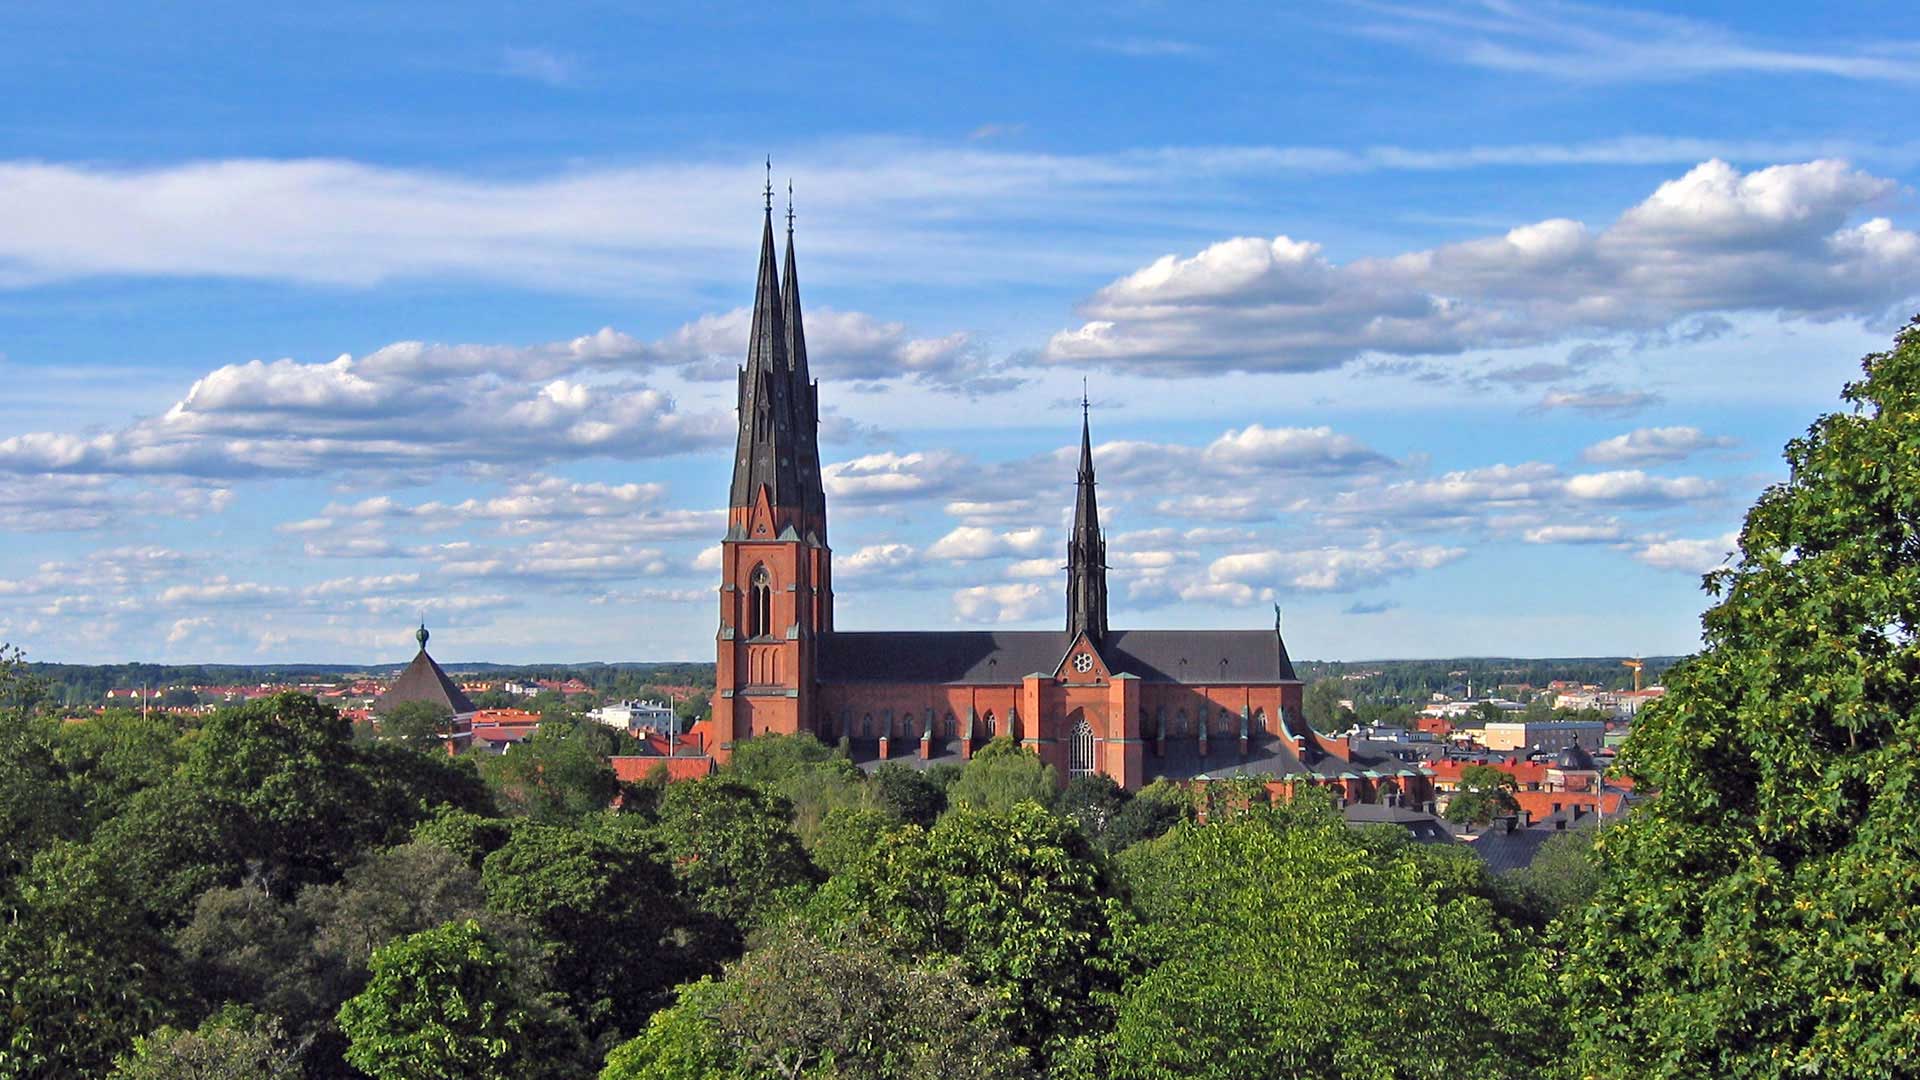 The spires of Uppsala Cathedral